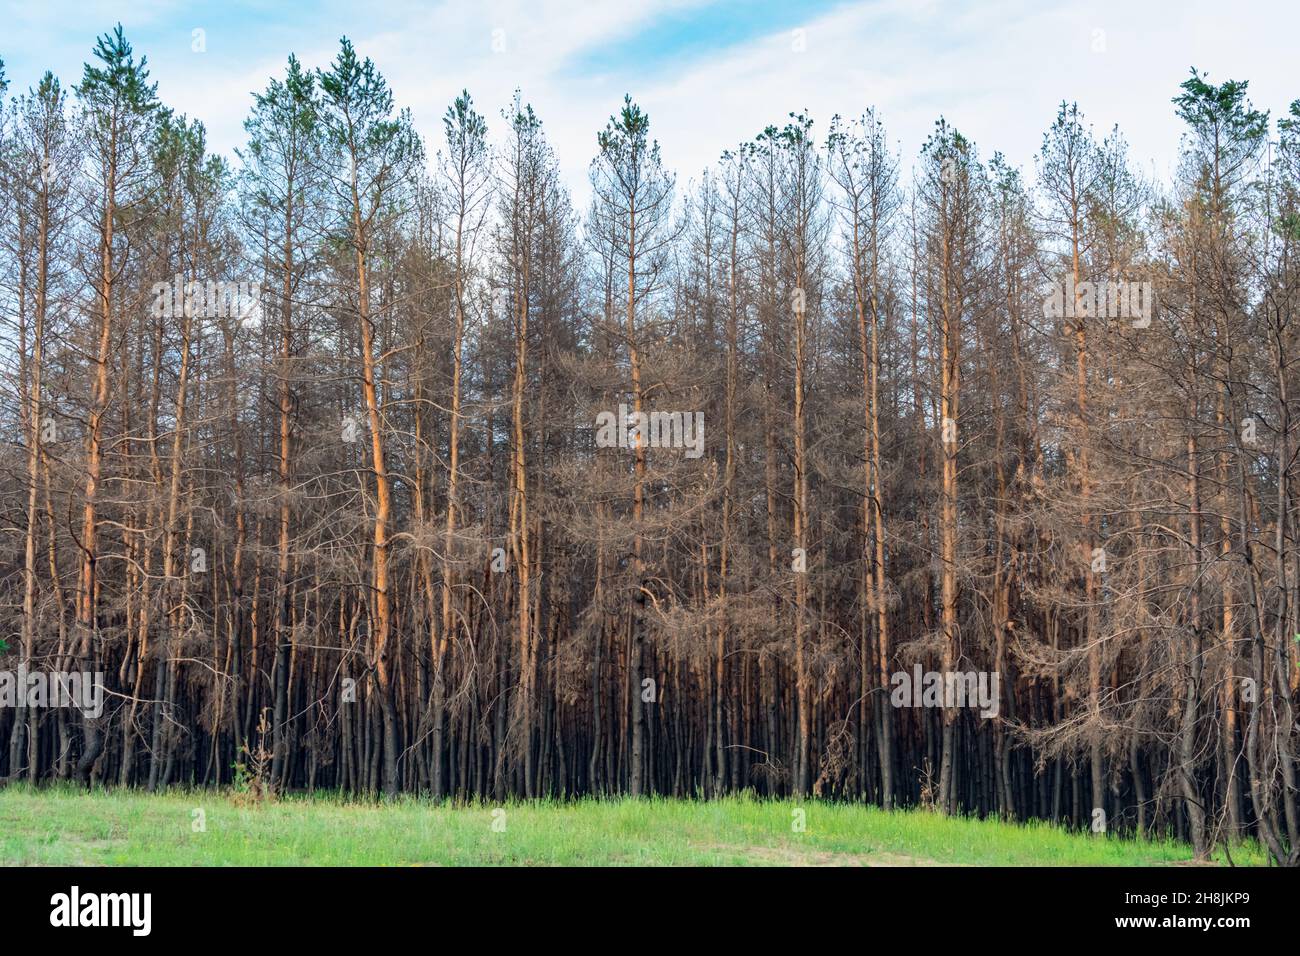 Coniferous forest one year after the fire. Coniferous trees burned down during a fire against a background of green grass. The problem of forest fires Stock Photo